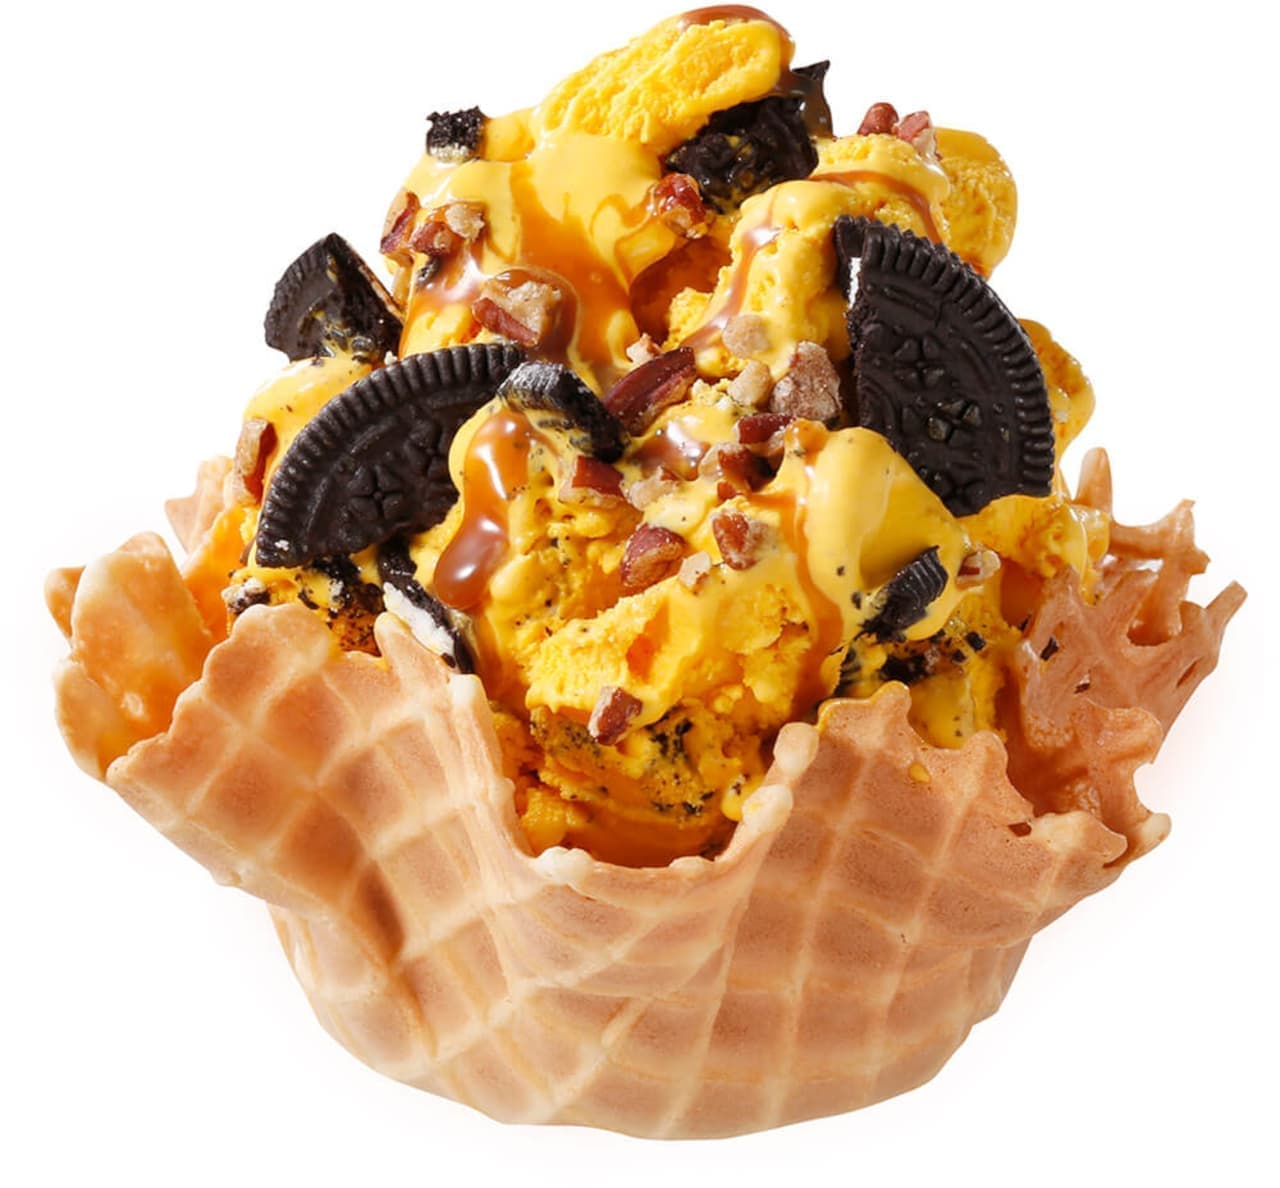 Cold Stone "Trick or Sweets" "Witches Pumpkin Cookies"